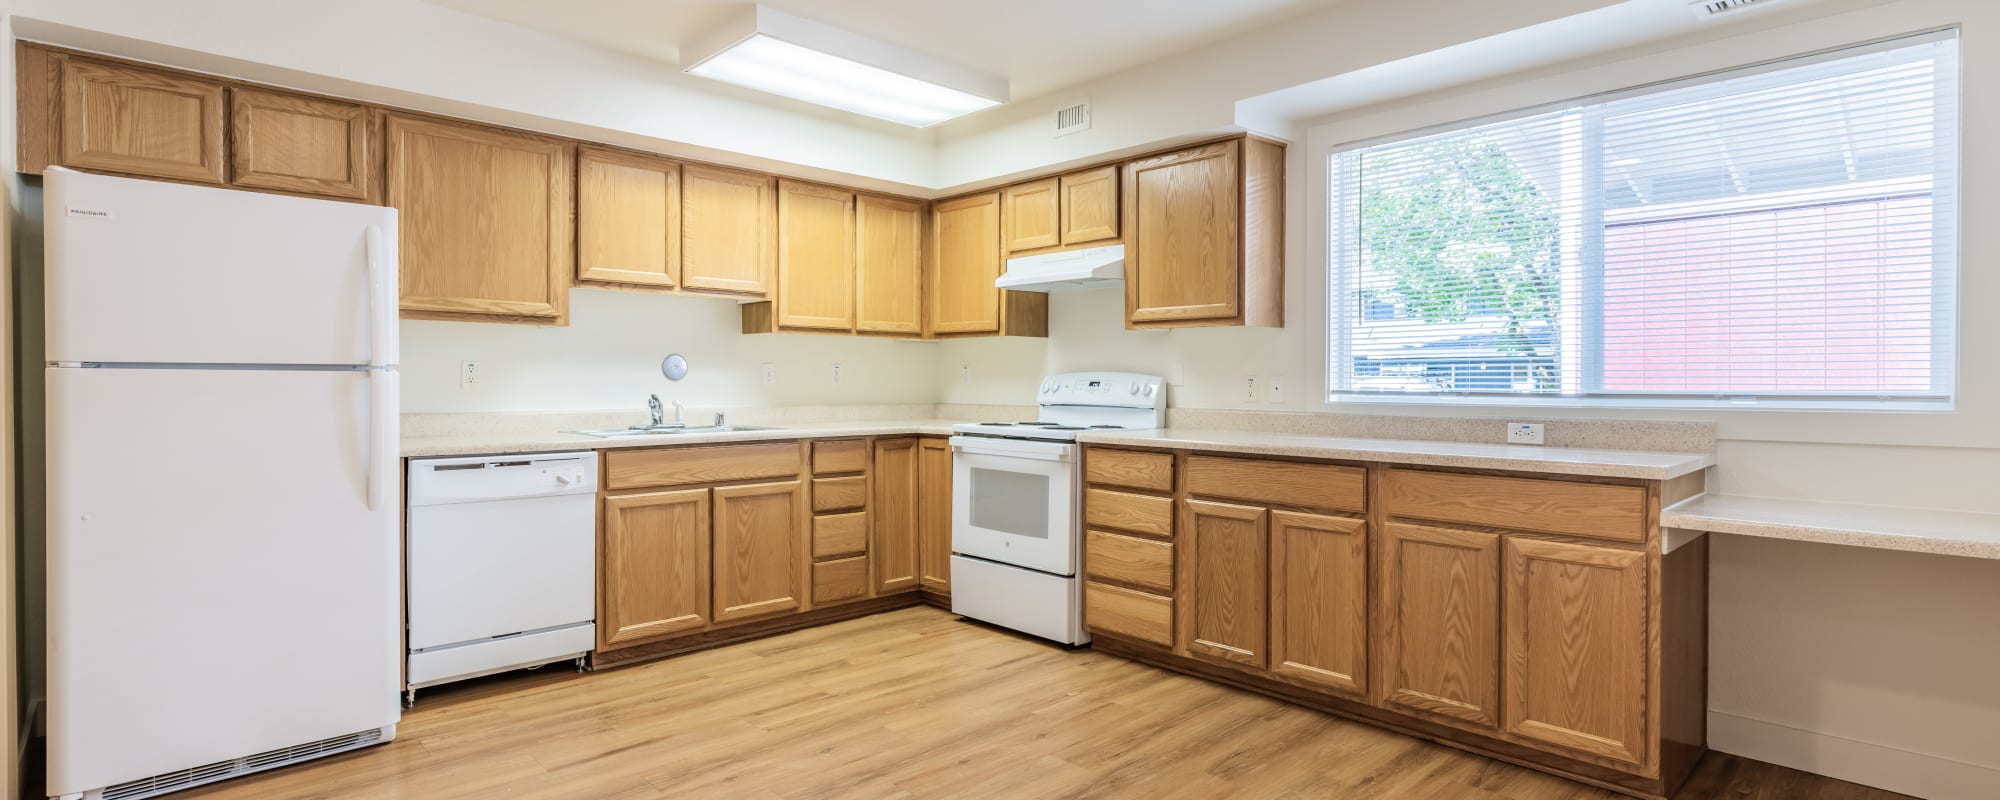 Large kitchen with ample storage at Hillside in Joint Base Lewis McChord, Washington